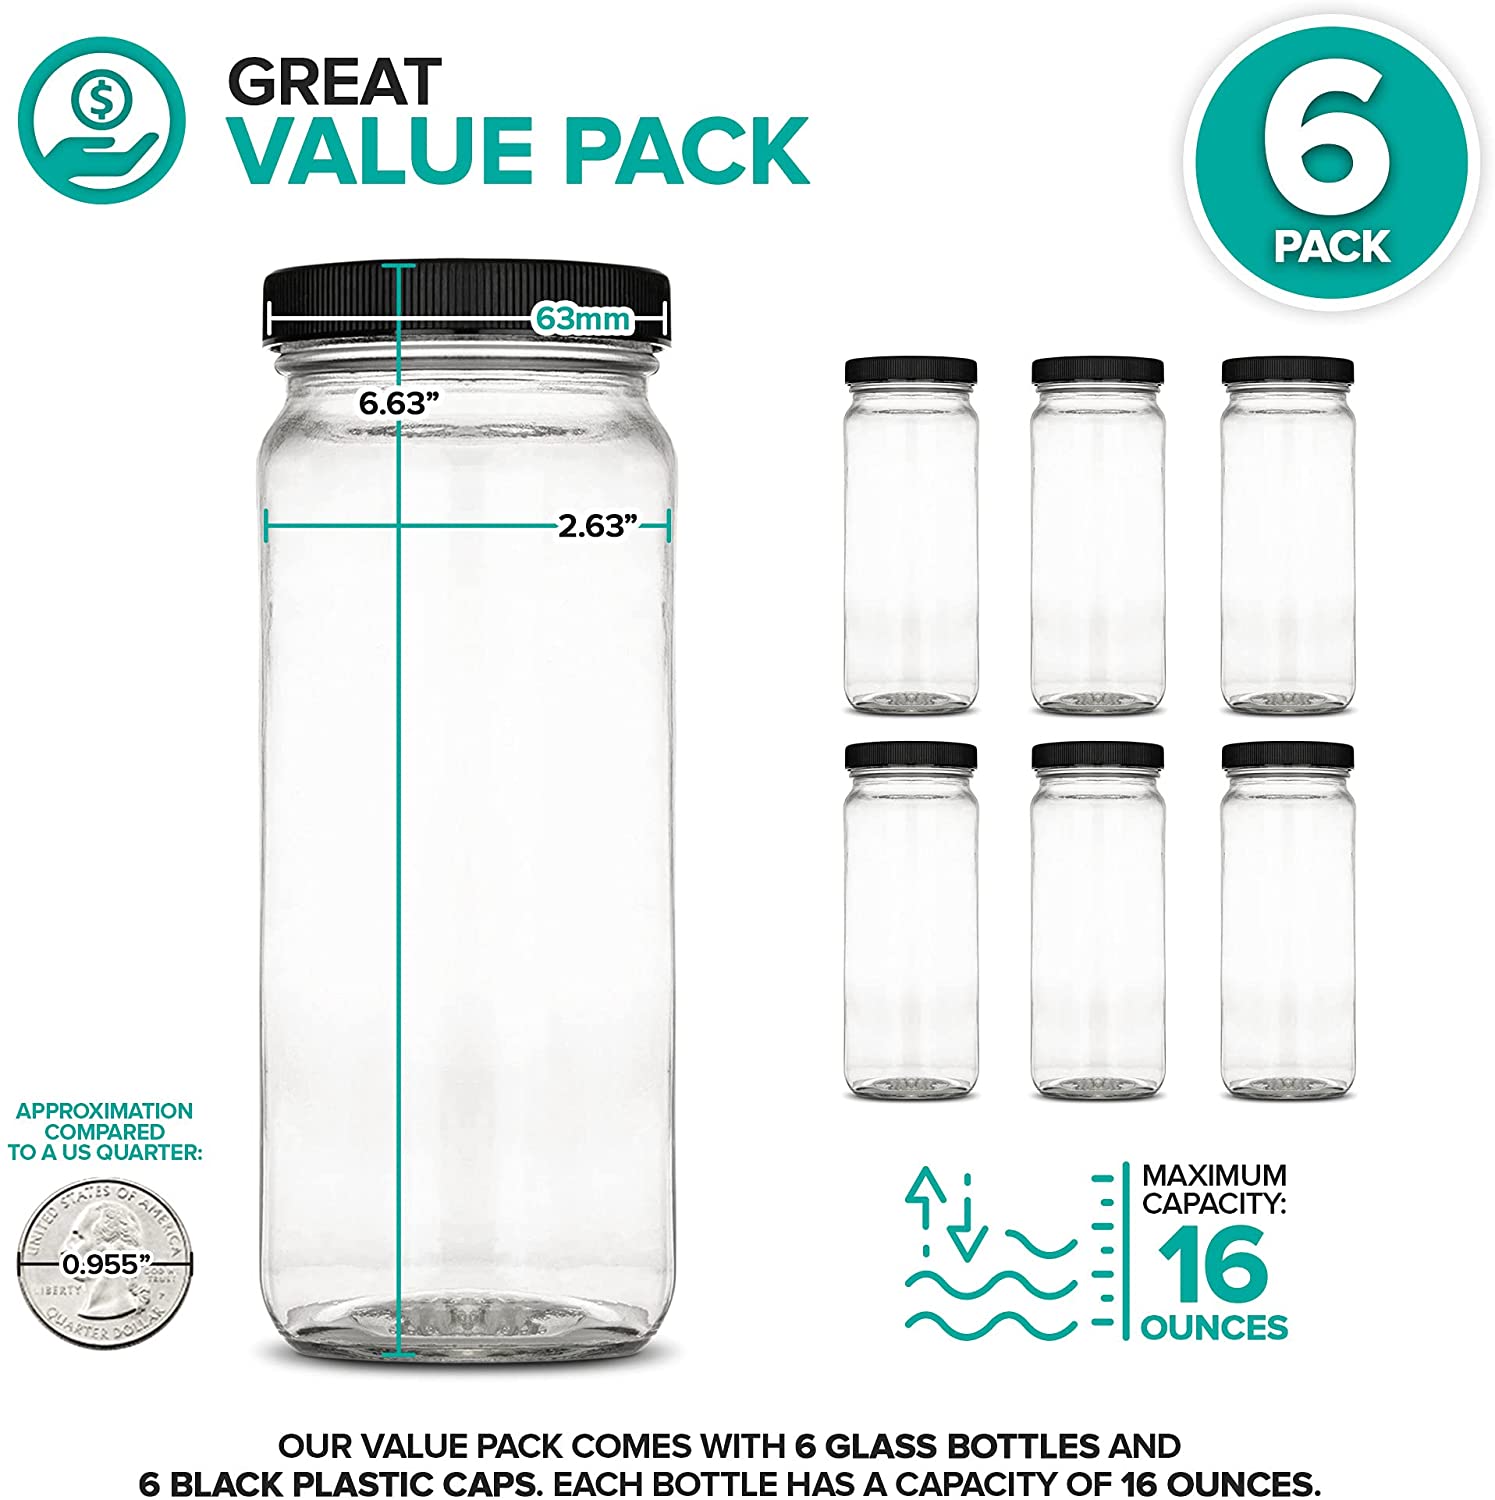 All About Juicing Clear Glass Water Bottles Set - 6 Pack Wide Mouth with Lids for Juice, Smoothies, Beverage Storage - 16 oz, du